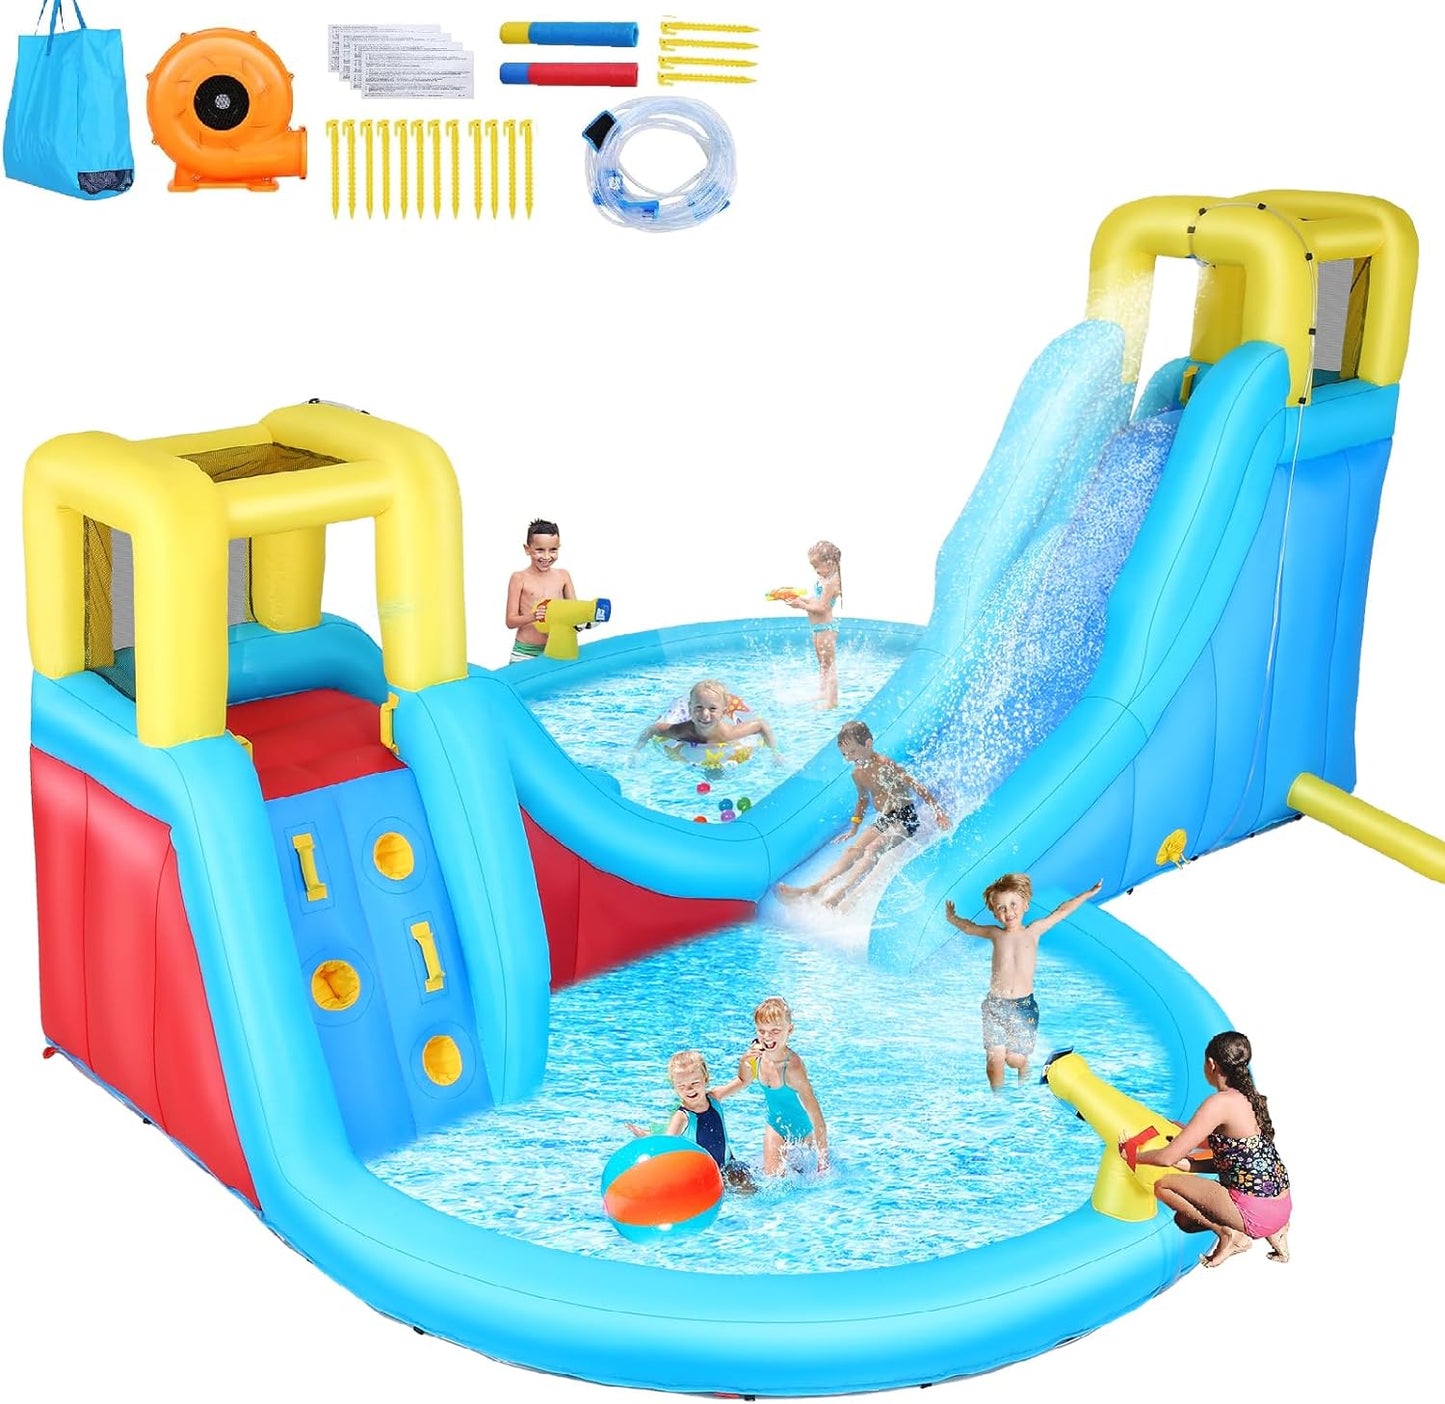 Inflatable Water Slide, 6 in 1 Outdoor Inflatable Water Park with Climbing, Basketball Rim, Splash Pool, Water Cannon, Blow up Water Slides for Kids Backyard